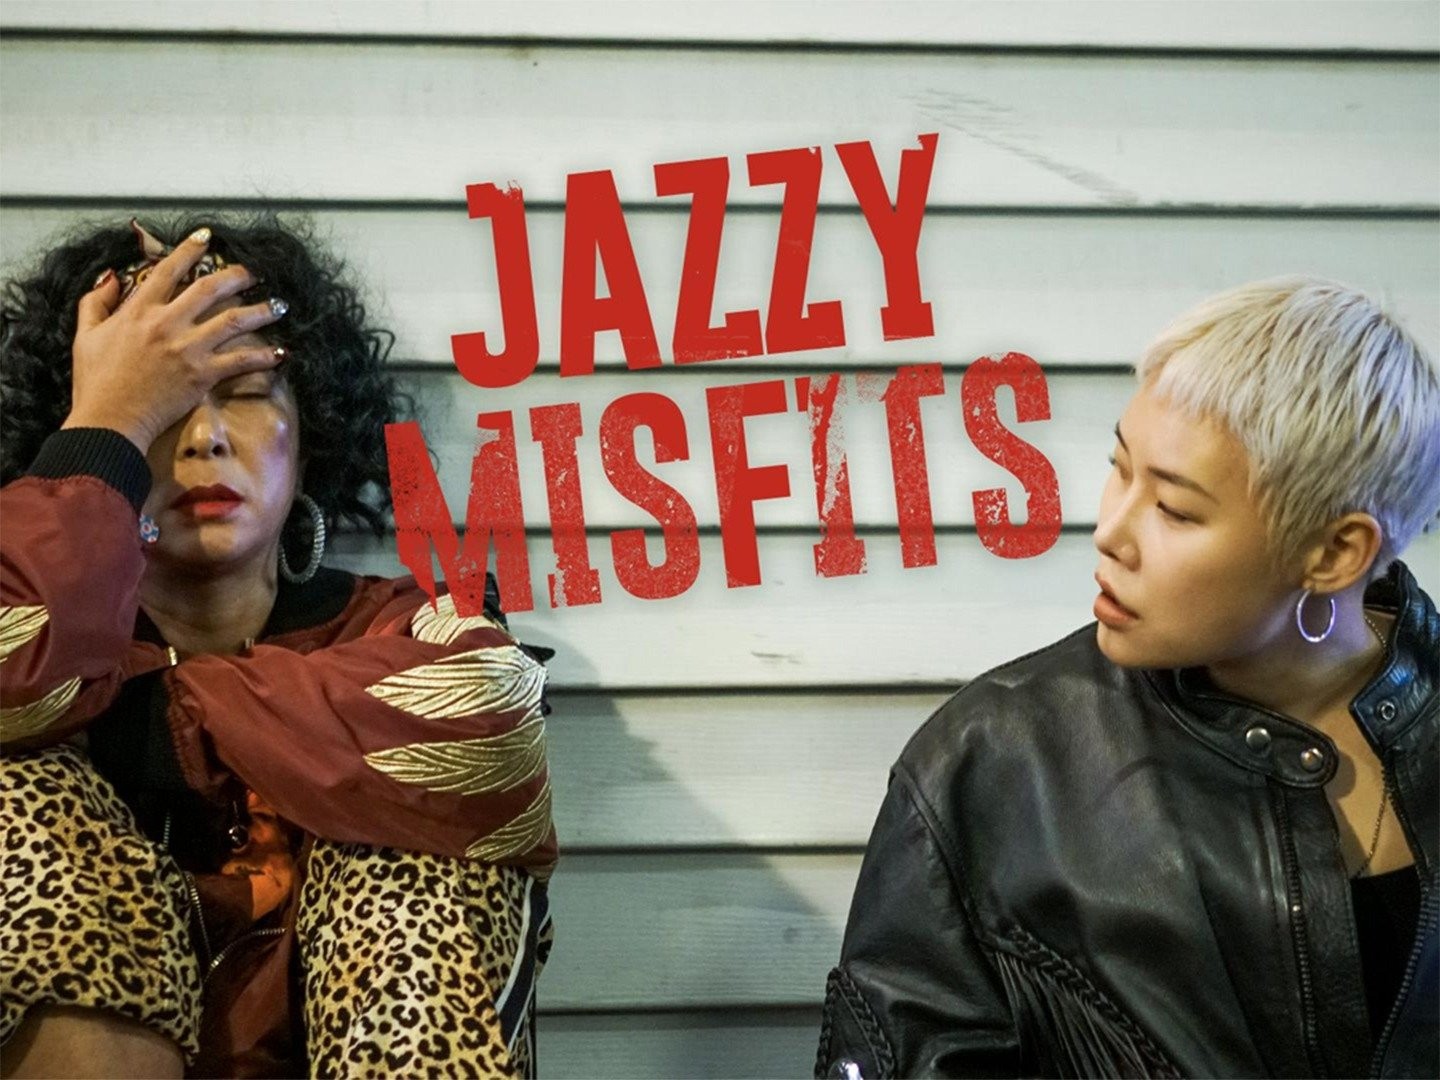 Herald Interview] Rapper Cheetah makes film debut with 'Jazzy Misfits